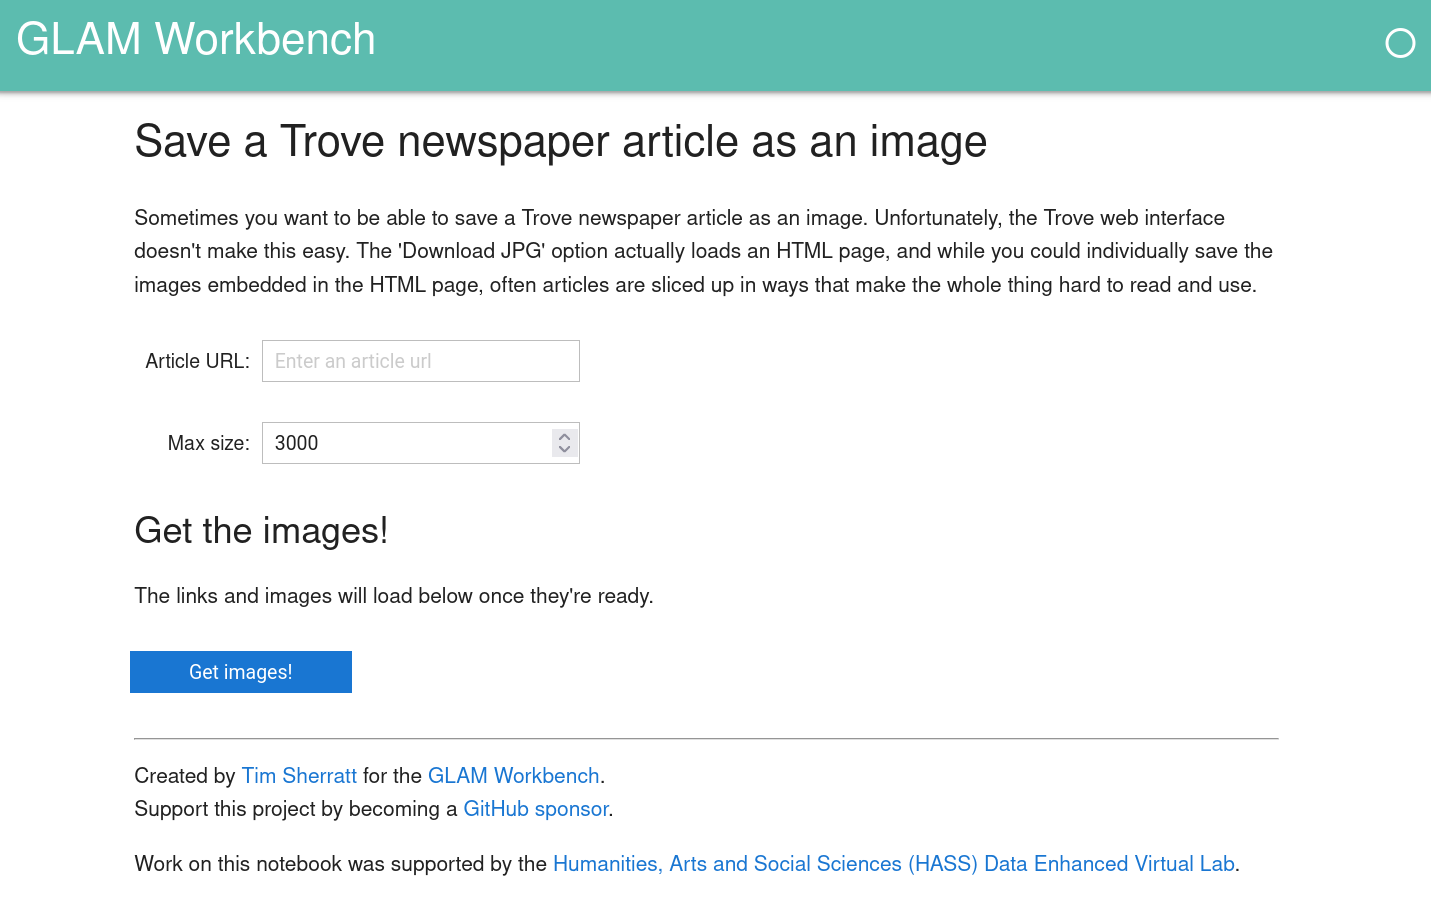 Screenshot of the web app to save Trove newspaper articles as images